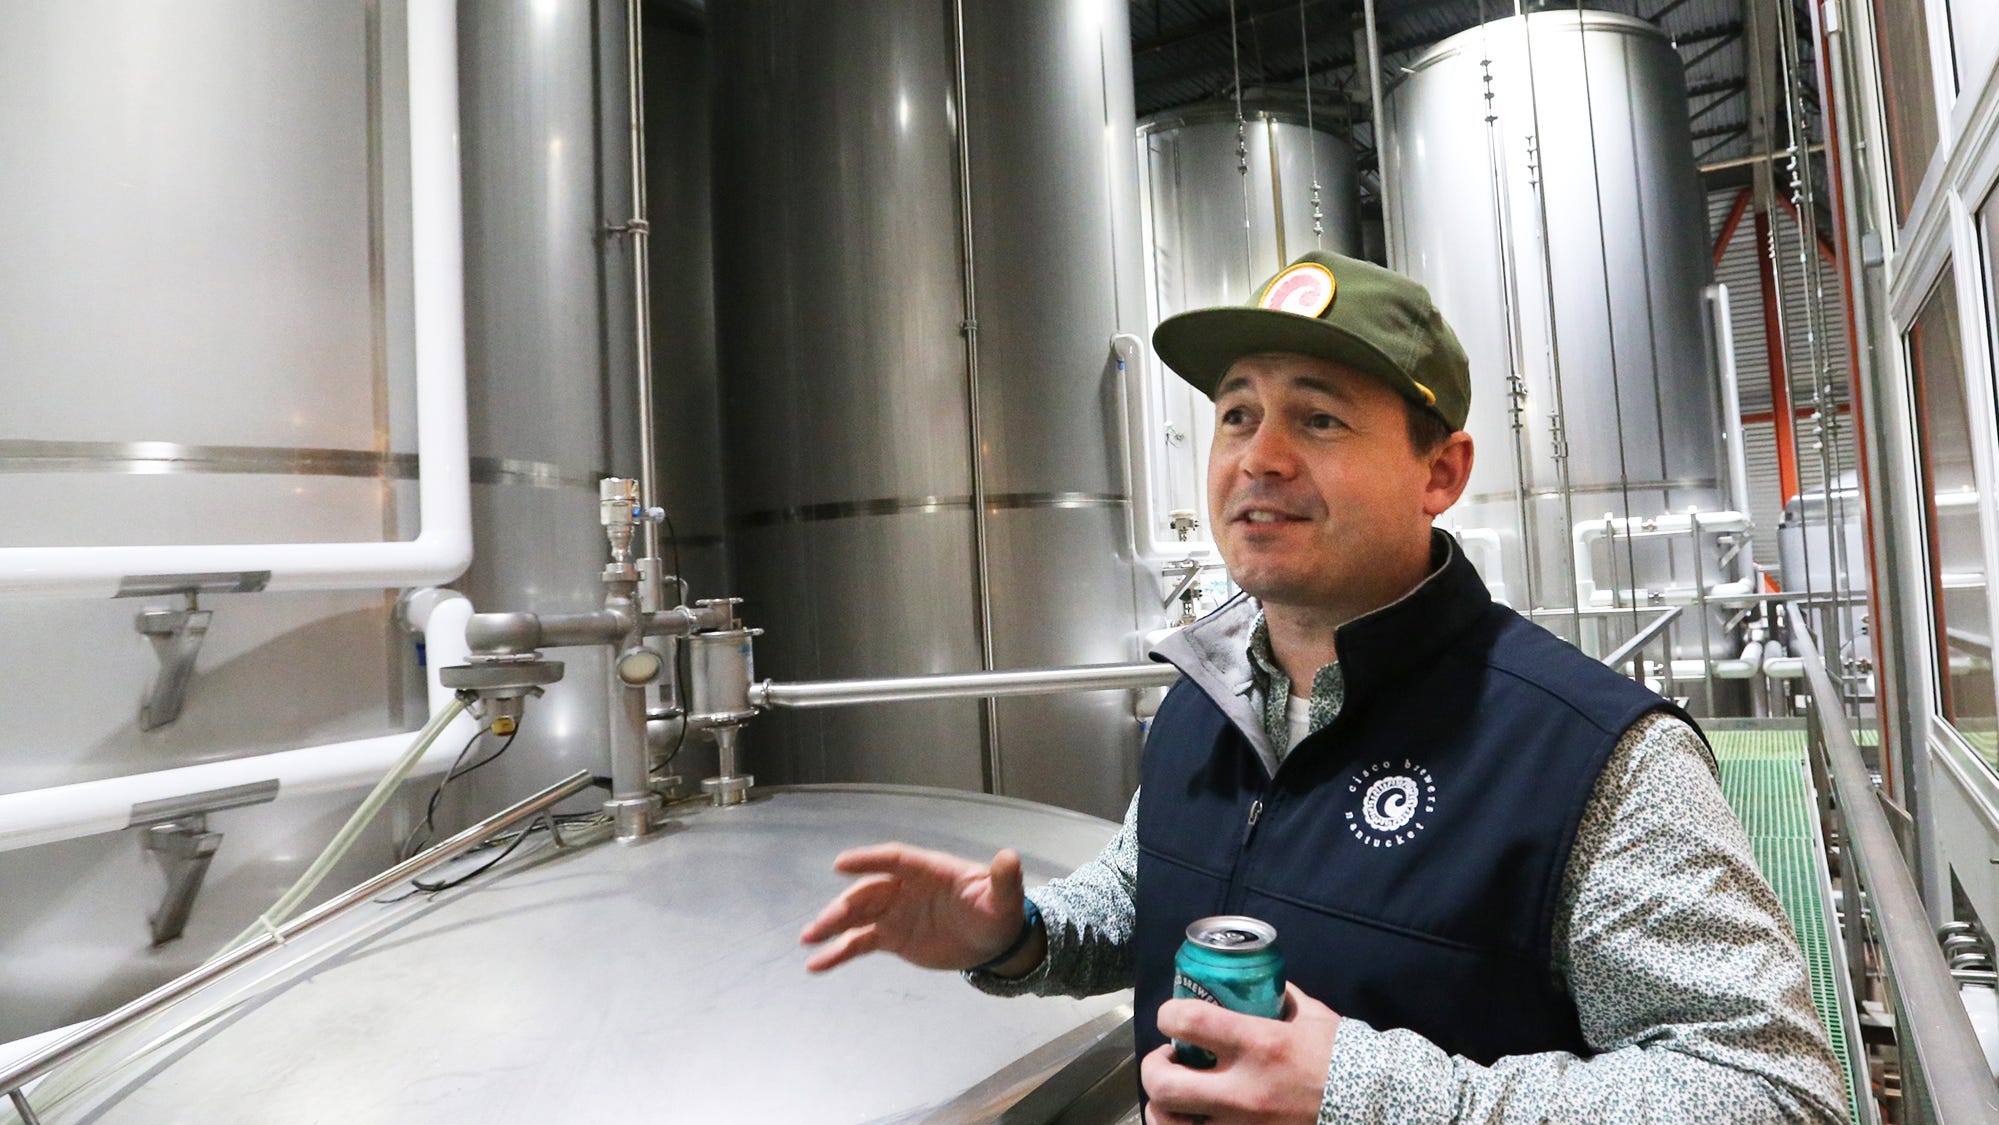   
																Cisco Brewers Portsmouth unveils $6 million canning line: 'More beer in more hands' 
															 